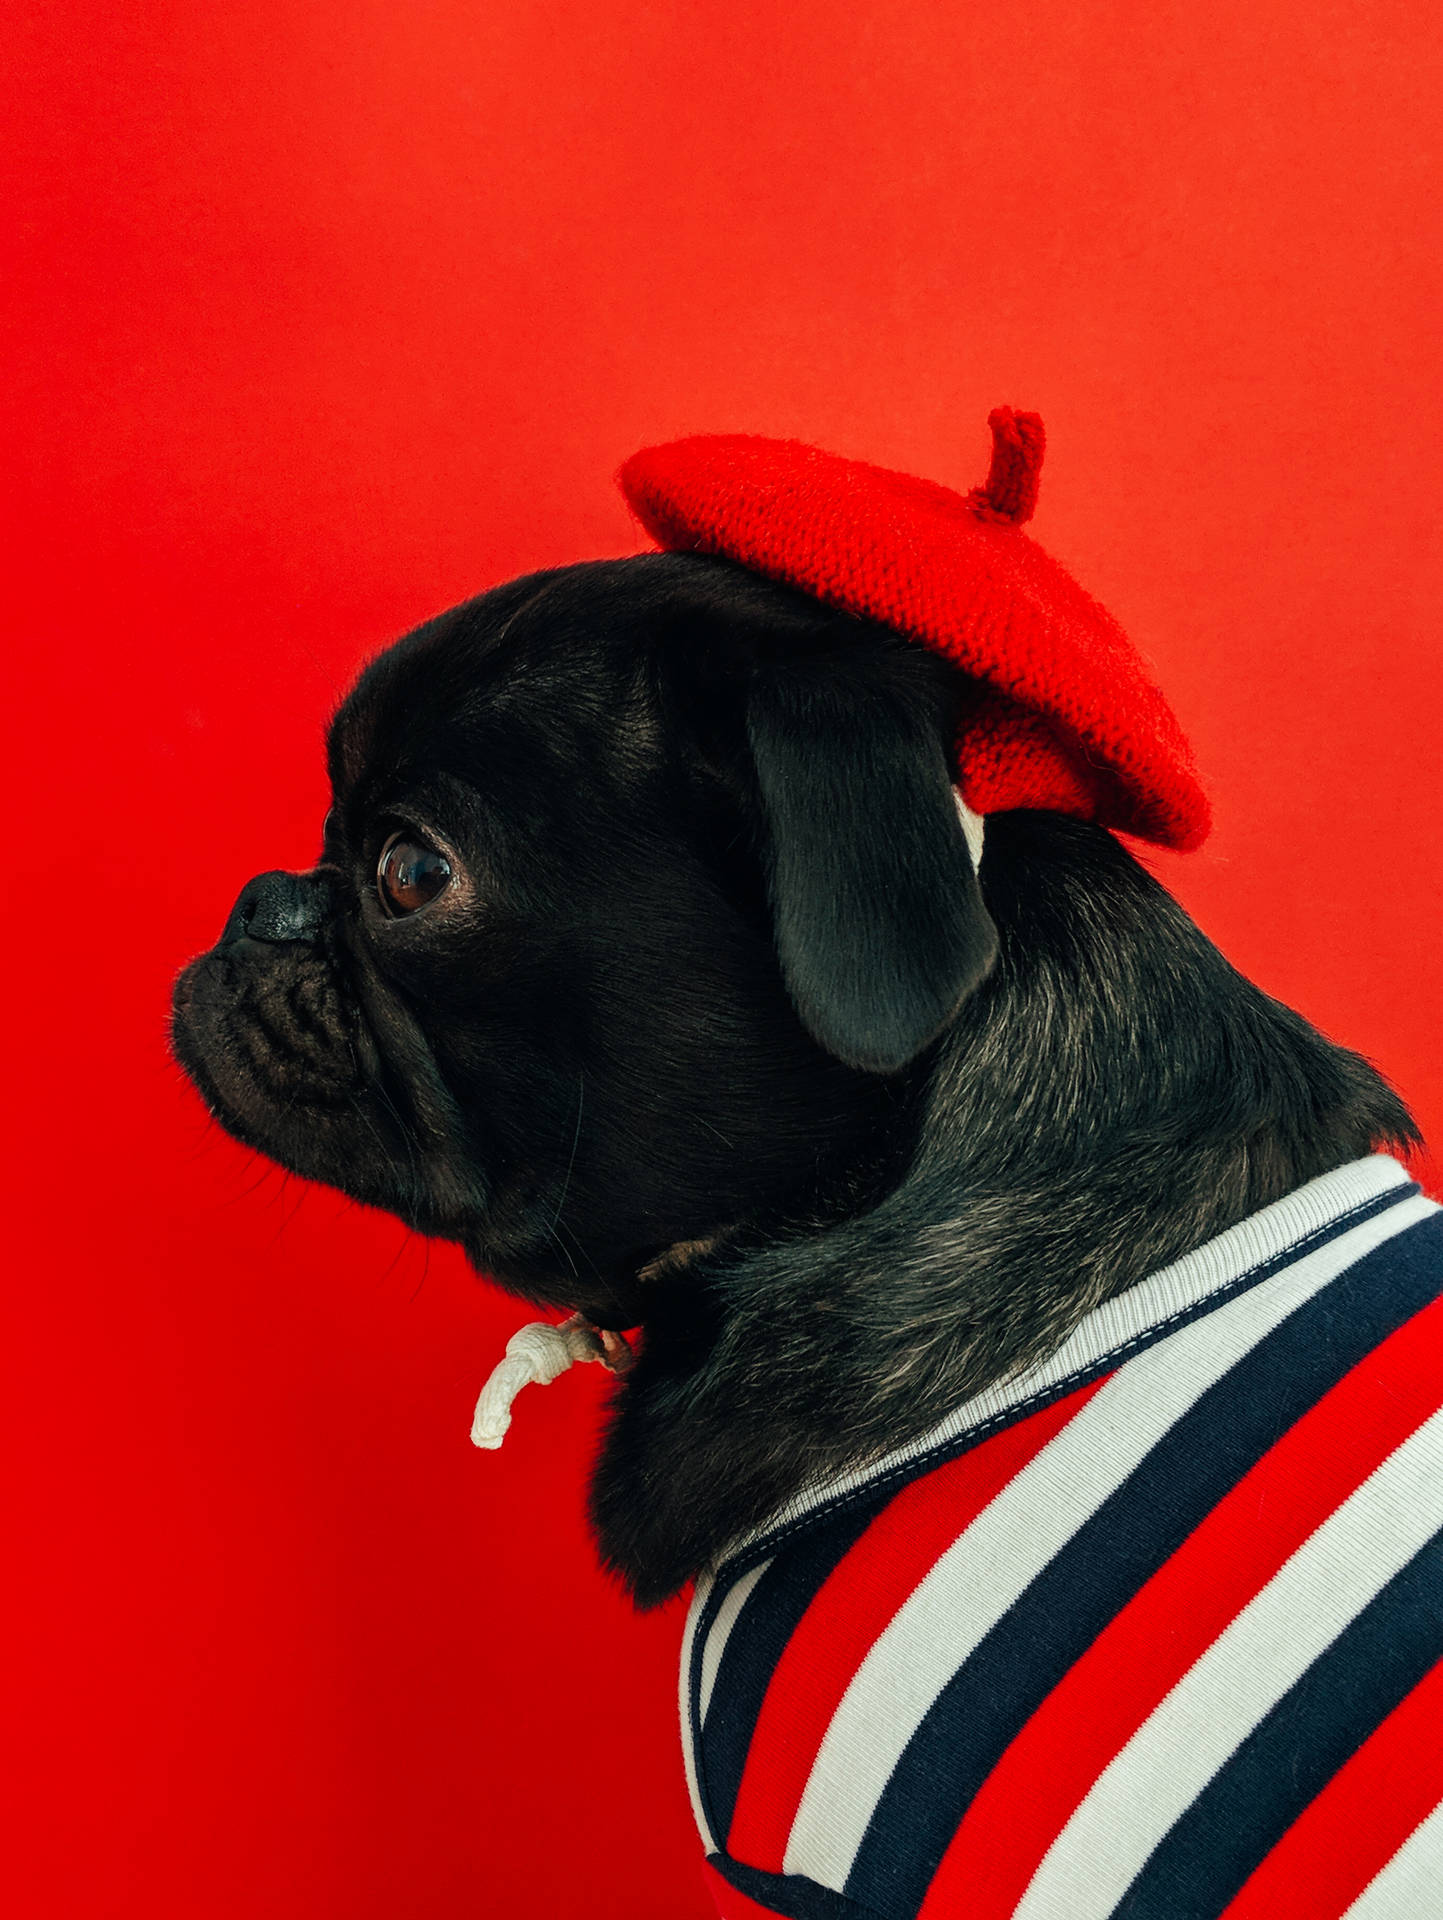 This Little Red Pug Is Ready to Play Wallpaper